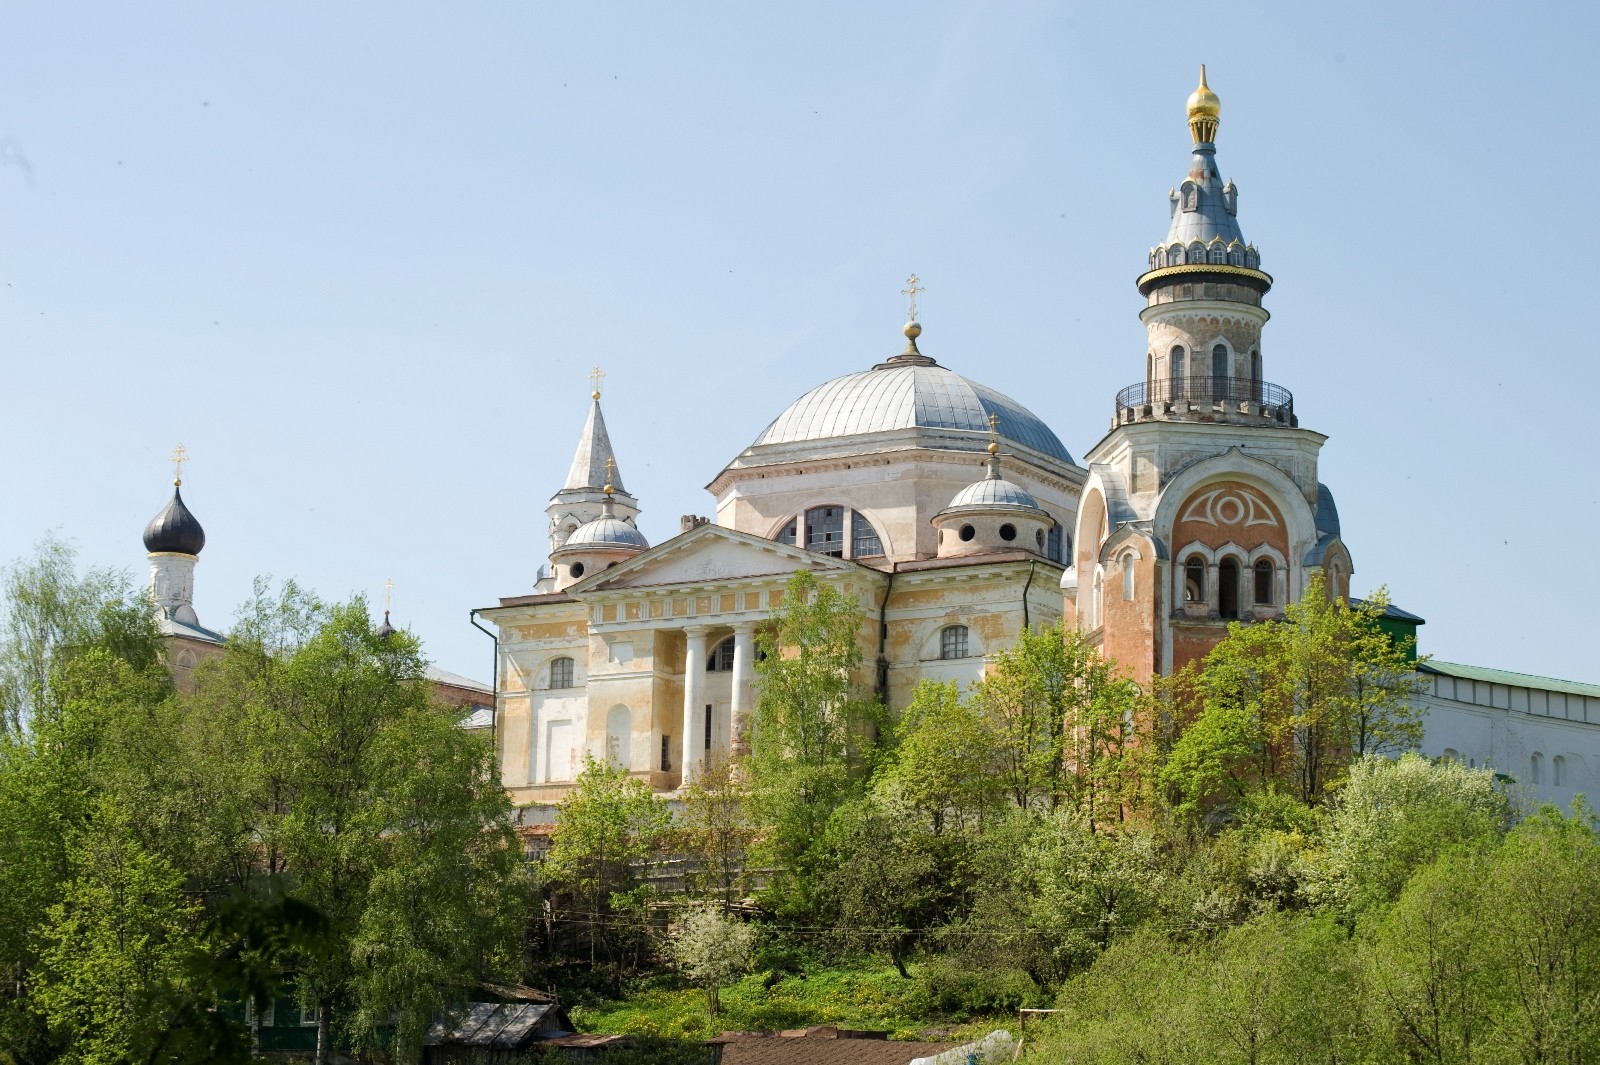 Monastery of Sts. Boris & Gleb. From left: Church of the Presentation, Cathedral of Sts. Boris & Gleb, 